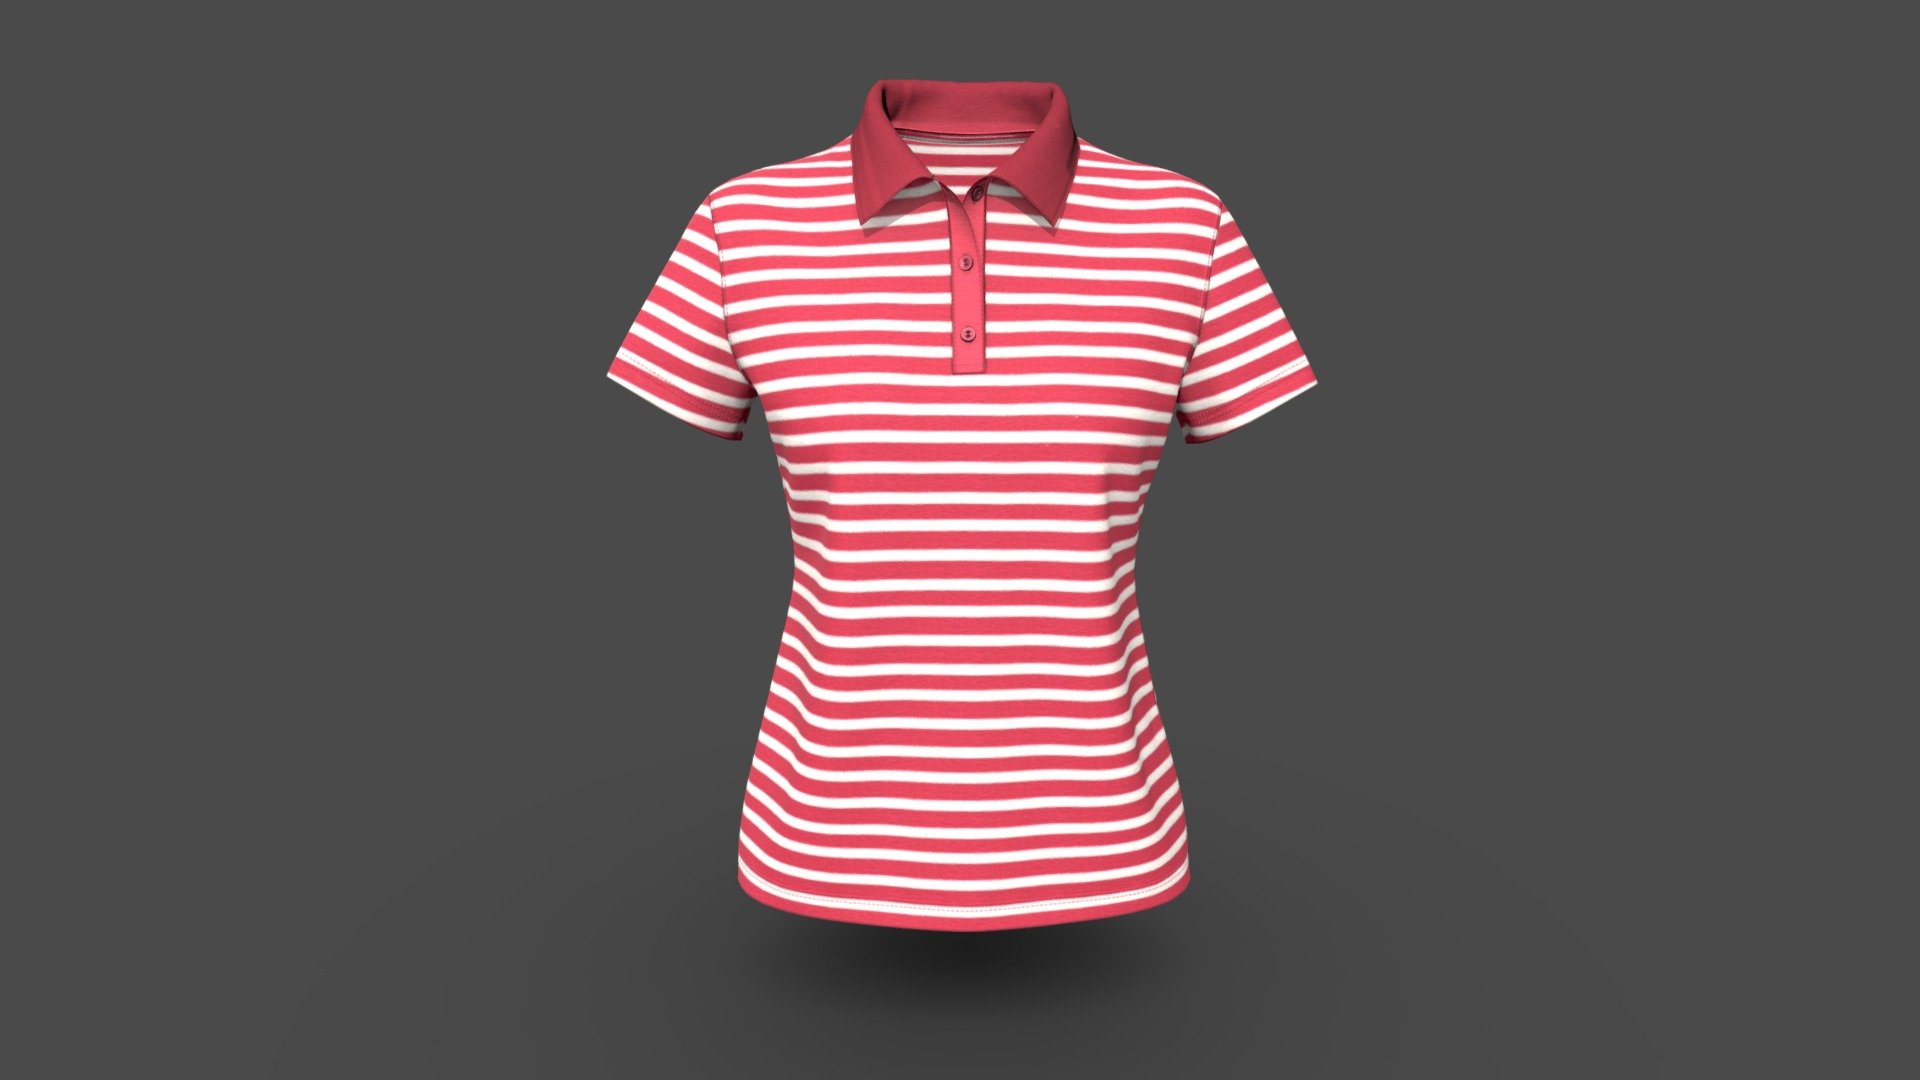 Women Classic Strip Polo Shirt
Version V1.0

Realistic high detailed Women Poloshirt with high resolution textures. Model created by our unique processing &amp; Optimized for Web and AR / VR. 

Features

Optimized &amp; NON-Optimized obj model with 4K texture included




Optimized for AR/VR/MR

4K &amp; 2K fabric texture and details

Optimized model is 1.18MB

NON-Optimized model is 8.67MB

Knit fabric texture and print details included

GLB file in 2k texture size is 4.28MB

GLB file in 4k texture size is 17.6MB  (Game &amp; Animation Ready)

Suitable for web application configurator development.

Fully unwrap UV

The model has 1 material

Includes high detailed normal map

Unit measurment was inch

Triangular Mesh with 11.6k Vertices

Texture map: Base color, OcclusionRoughnessMetallic(ORM), Normal

Tpose  available on request

For more details or custom order send email: hello@binarycloth.com


Website:binarycloth.com - Women Classic Strip Polo Shirt - Buy Royalty Free 3D model by BINARYCLOTH (@binaryclothofficial) 3d model